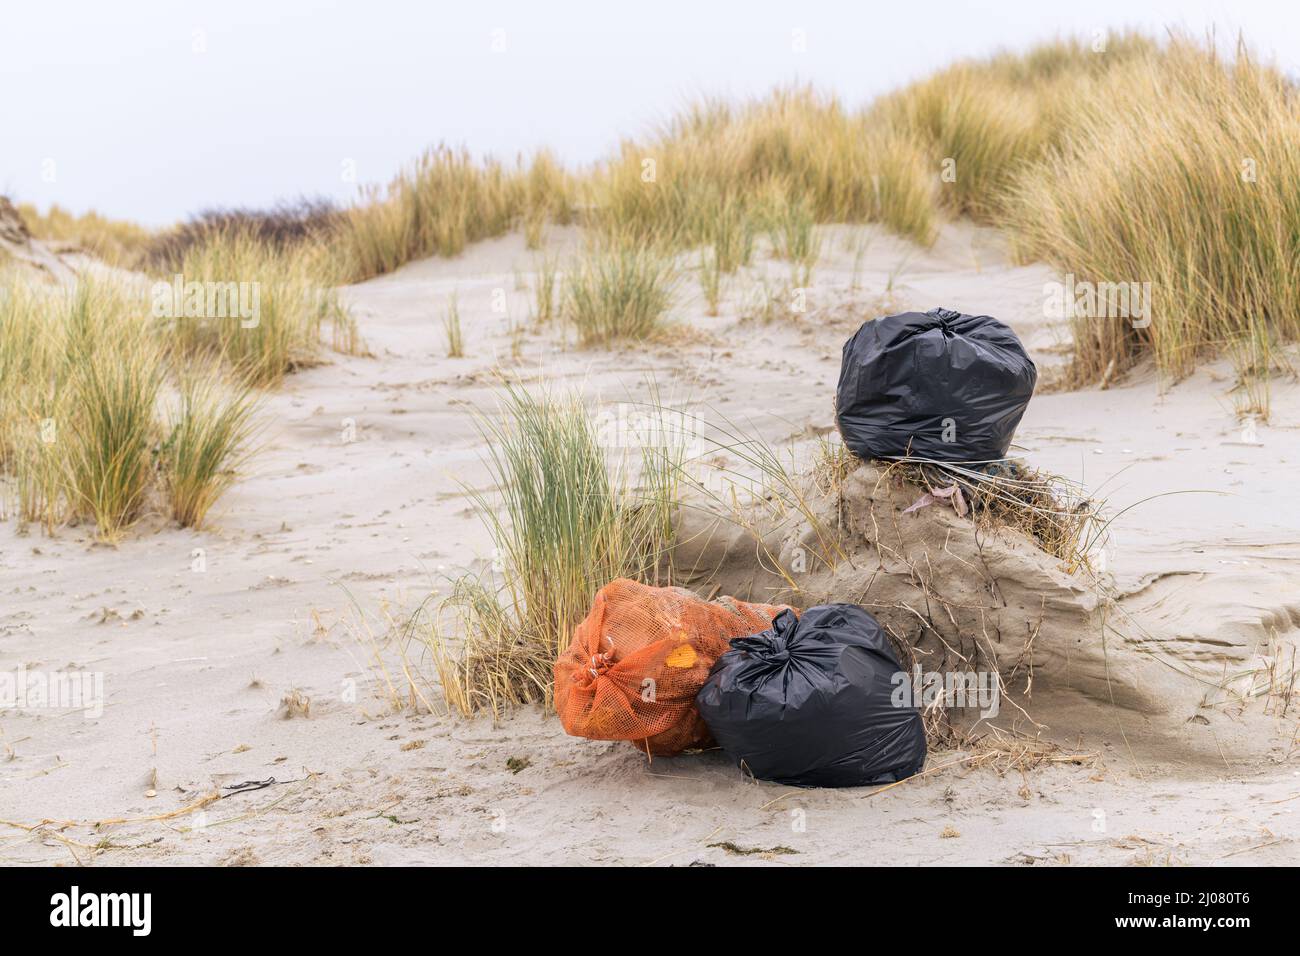 Black and orange plastic bags full of litter collected during a clean up at the beach in The Netherlands. Stock Photo